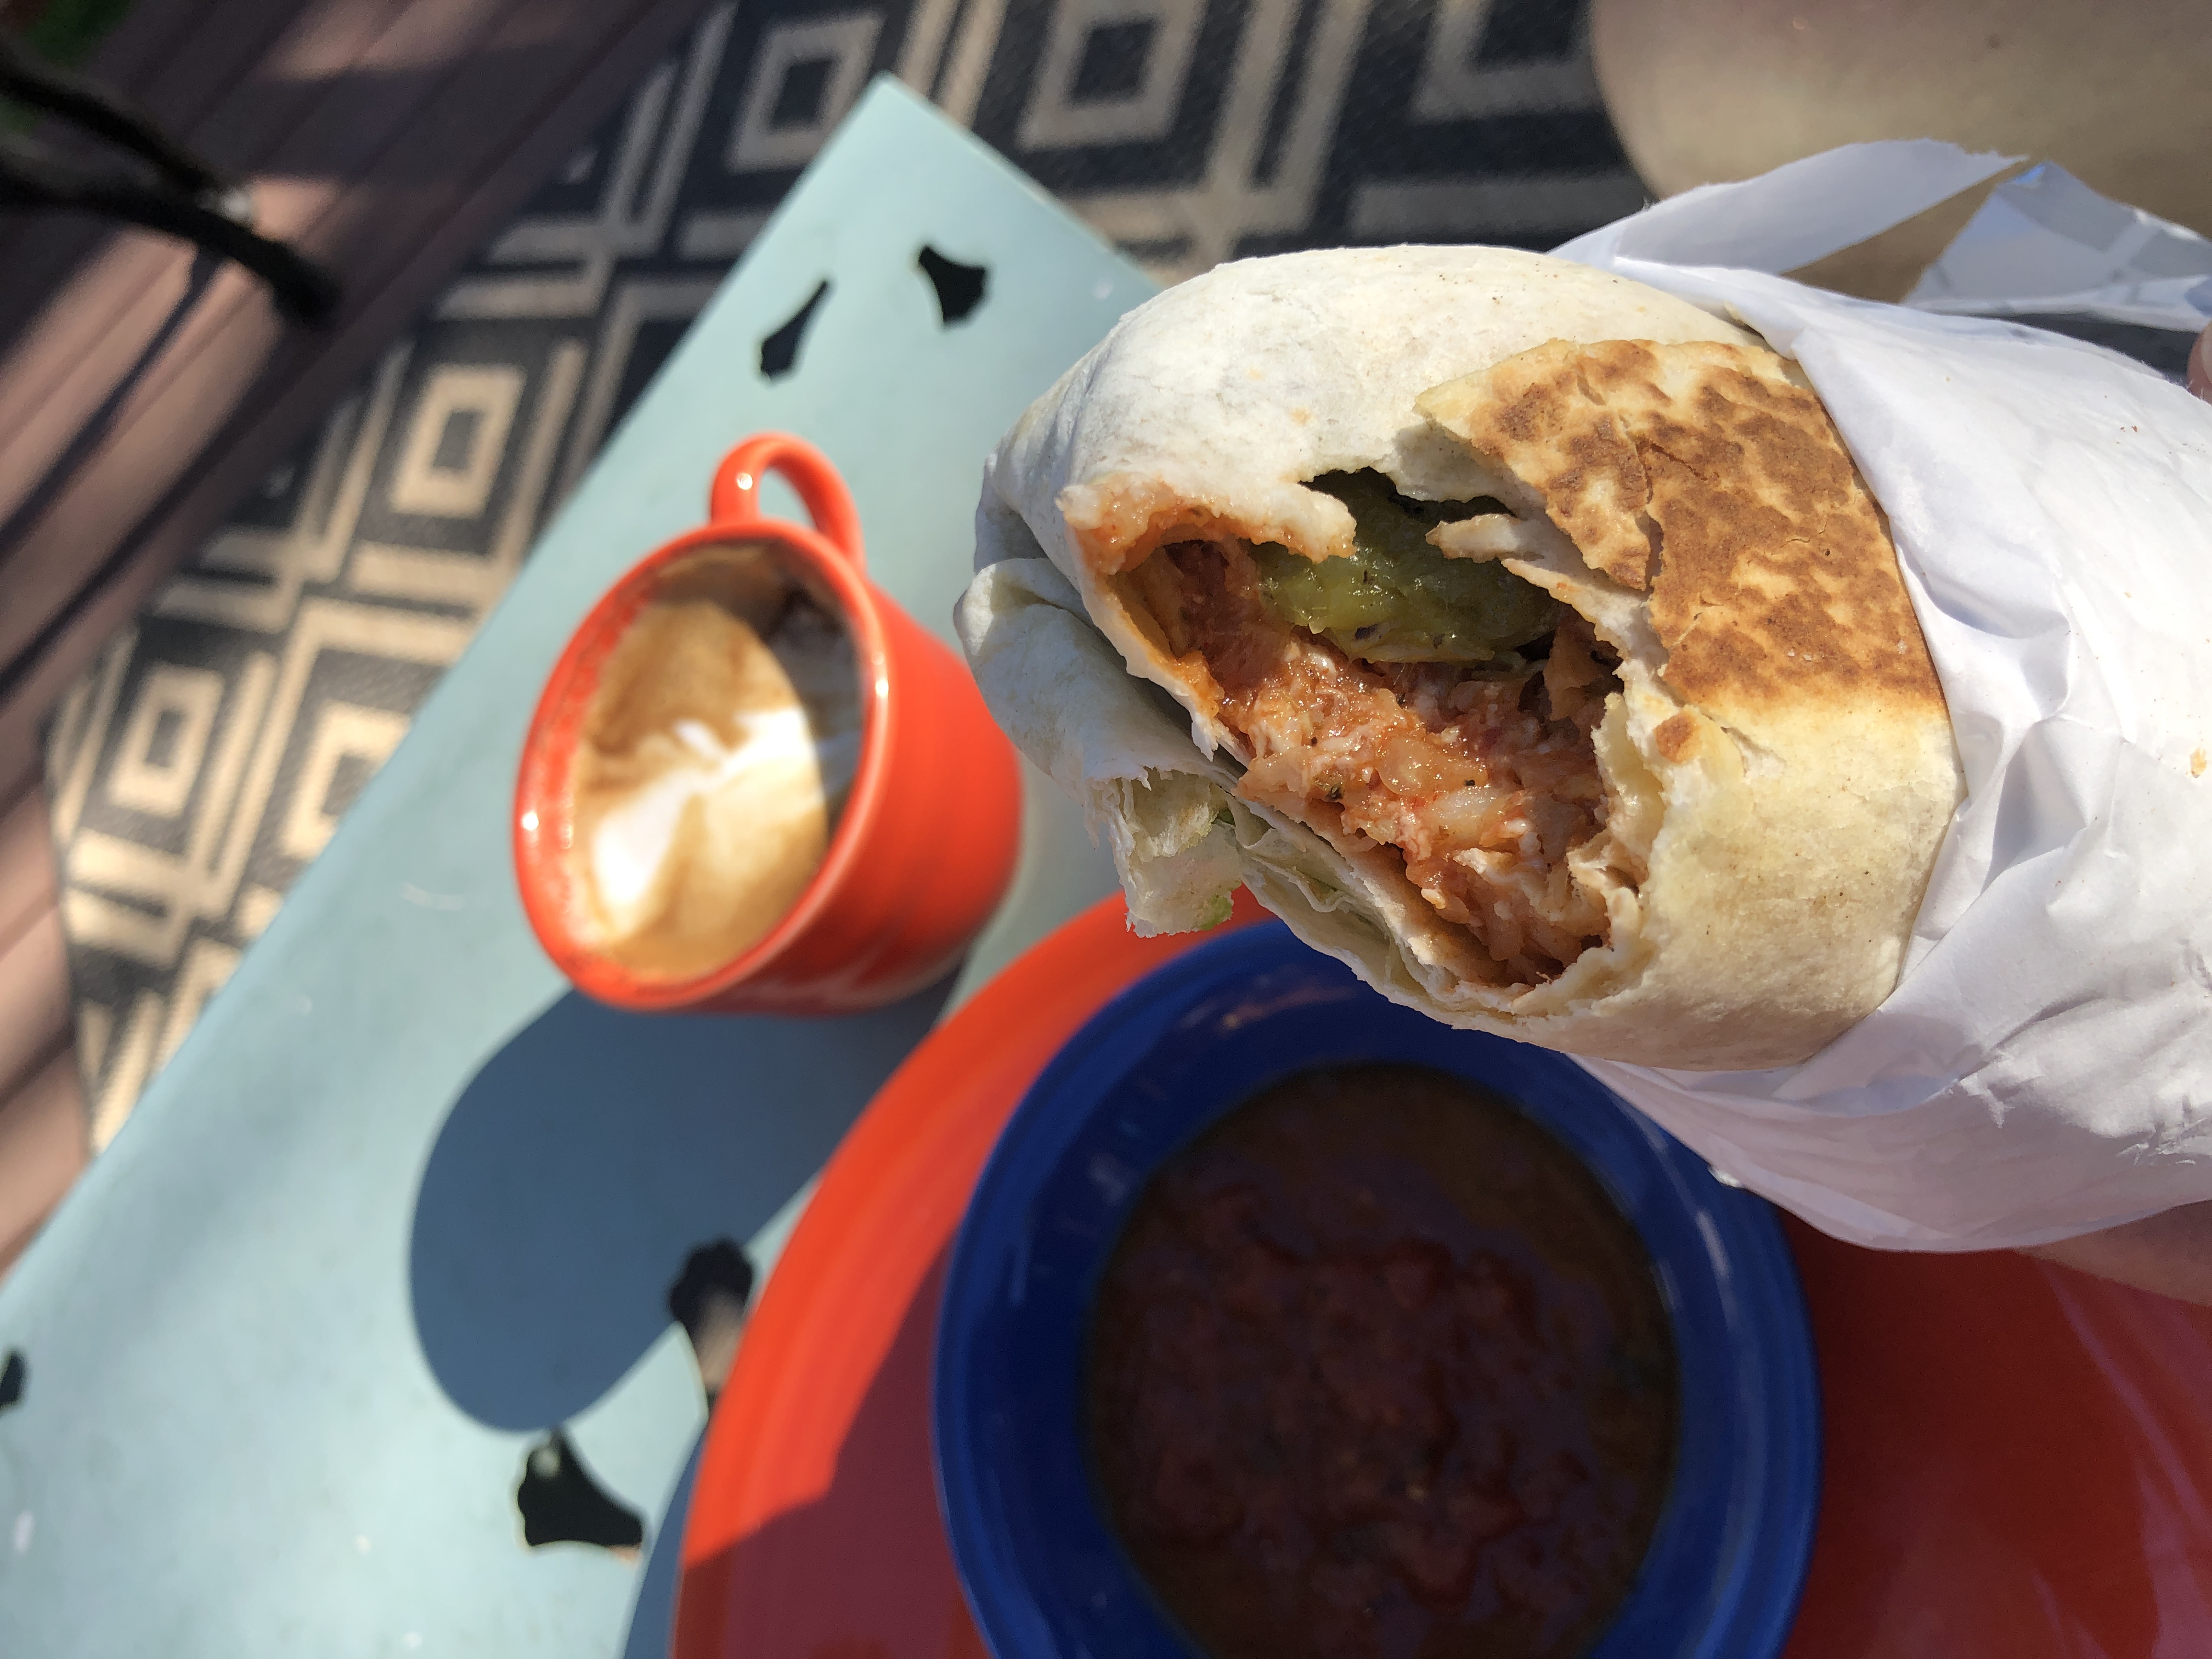 A large burrito with one bite taken out, with a coffee cup in the sun behind it